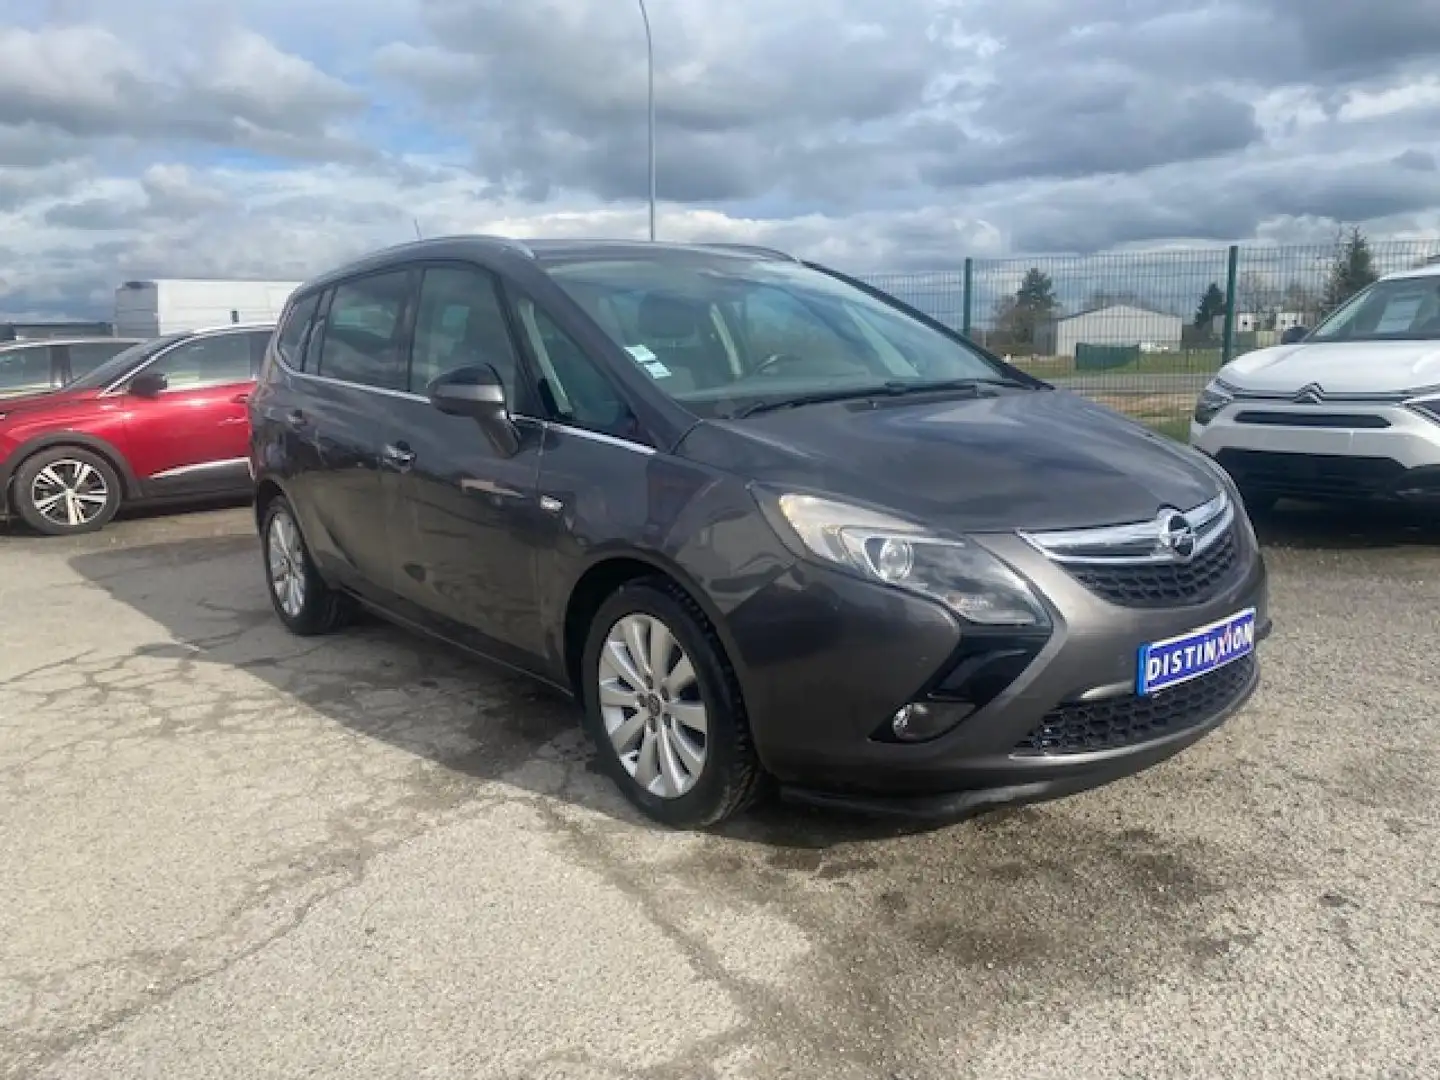 Opel Zafira Tourer 2.0 - 130 - COSMO + ATTELAGE + 7PLACES Gri - 2